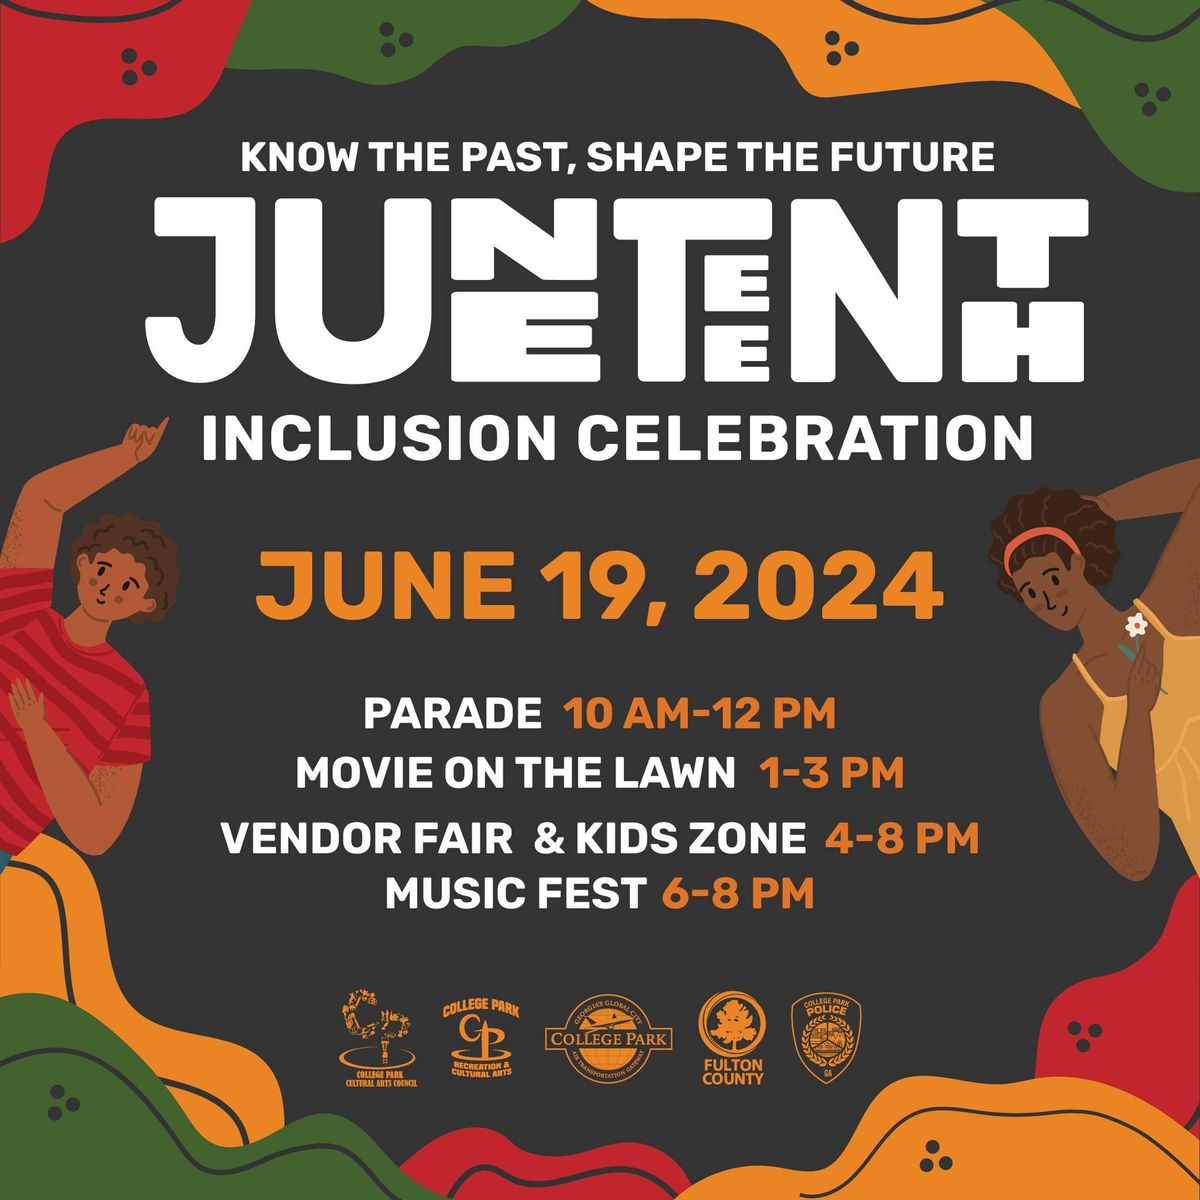 Juneteenth Inclusion Celebration: Know the Past, Shape the Future